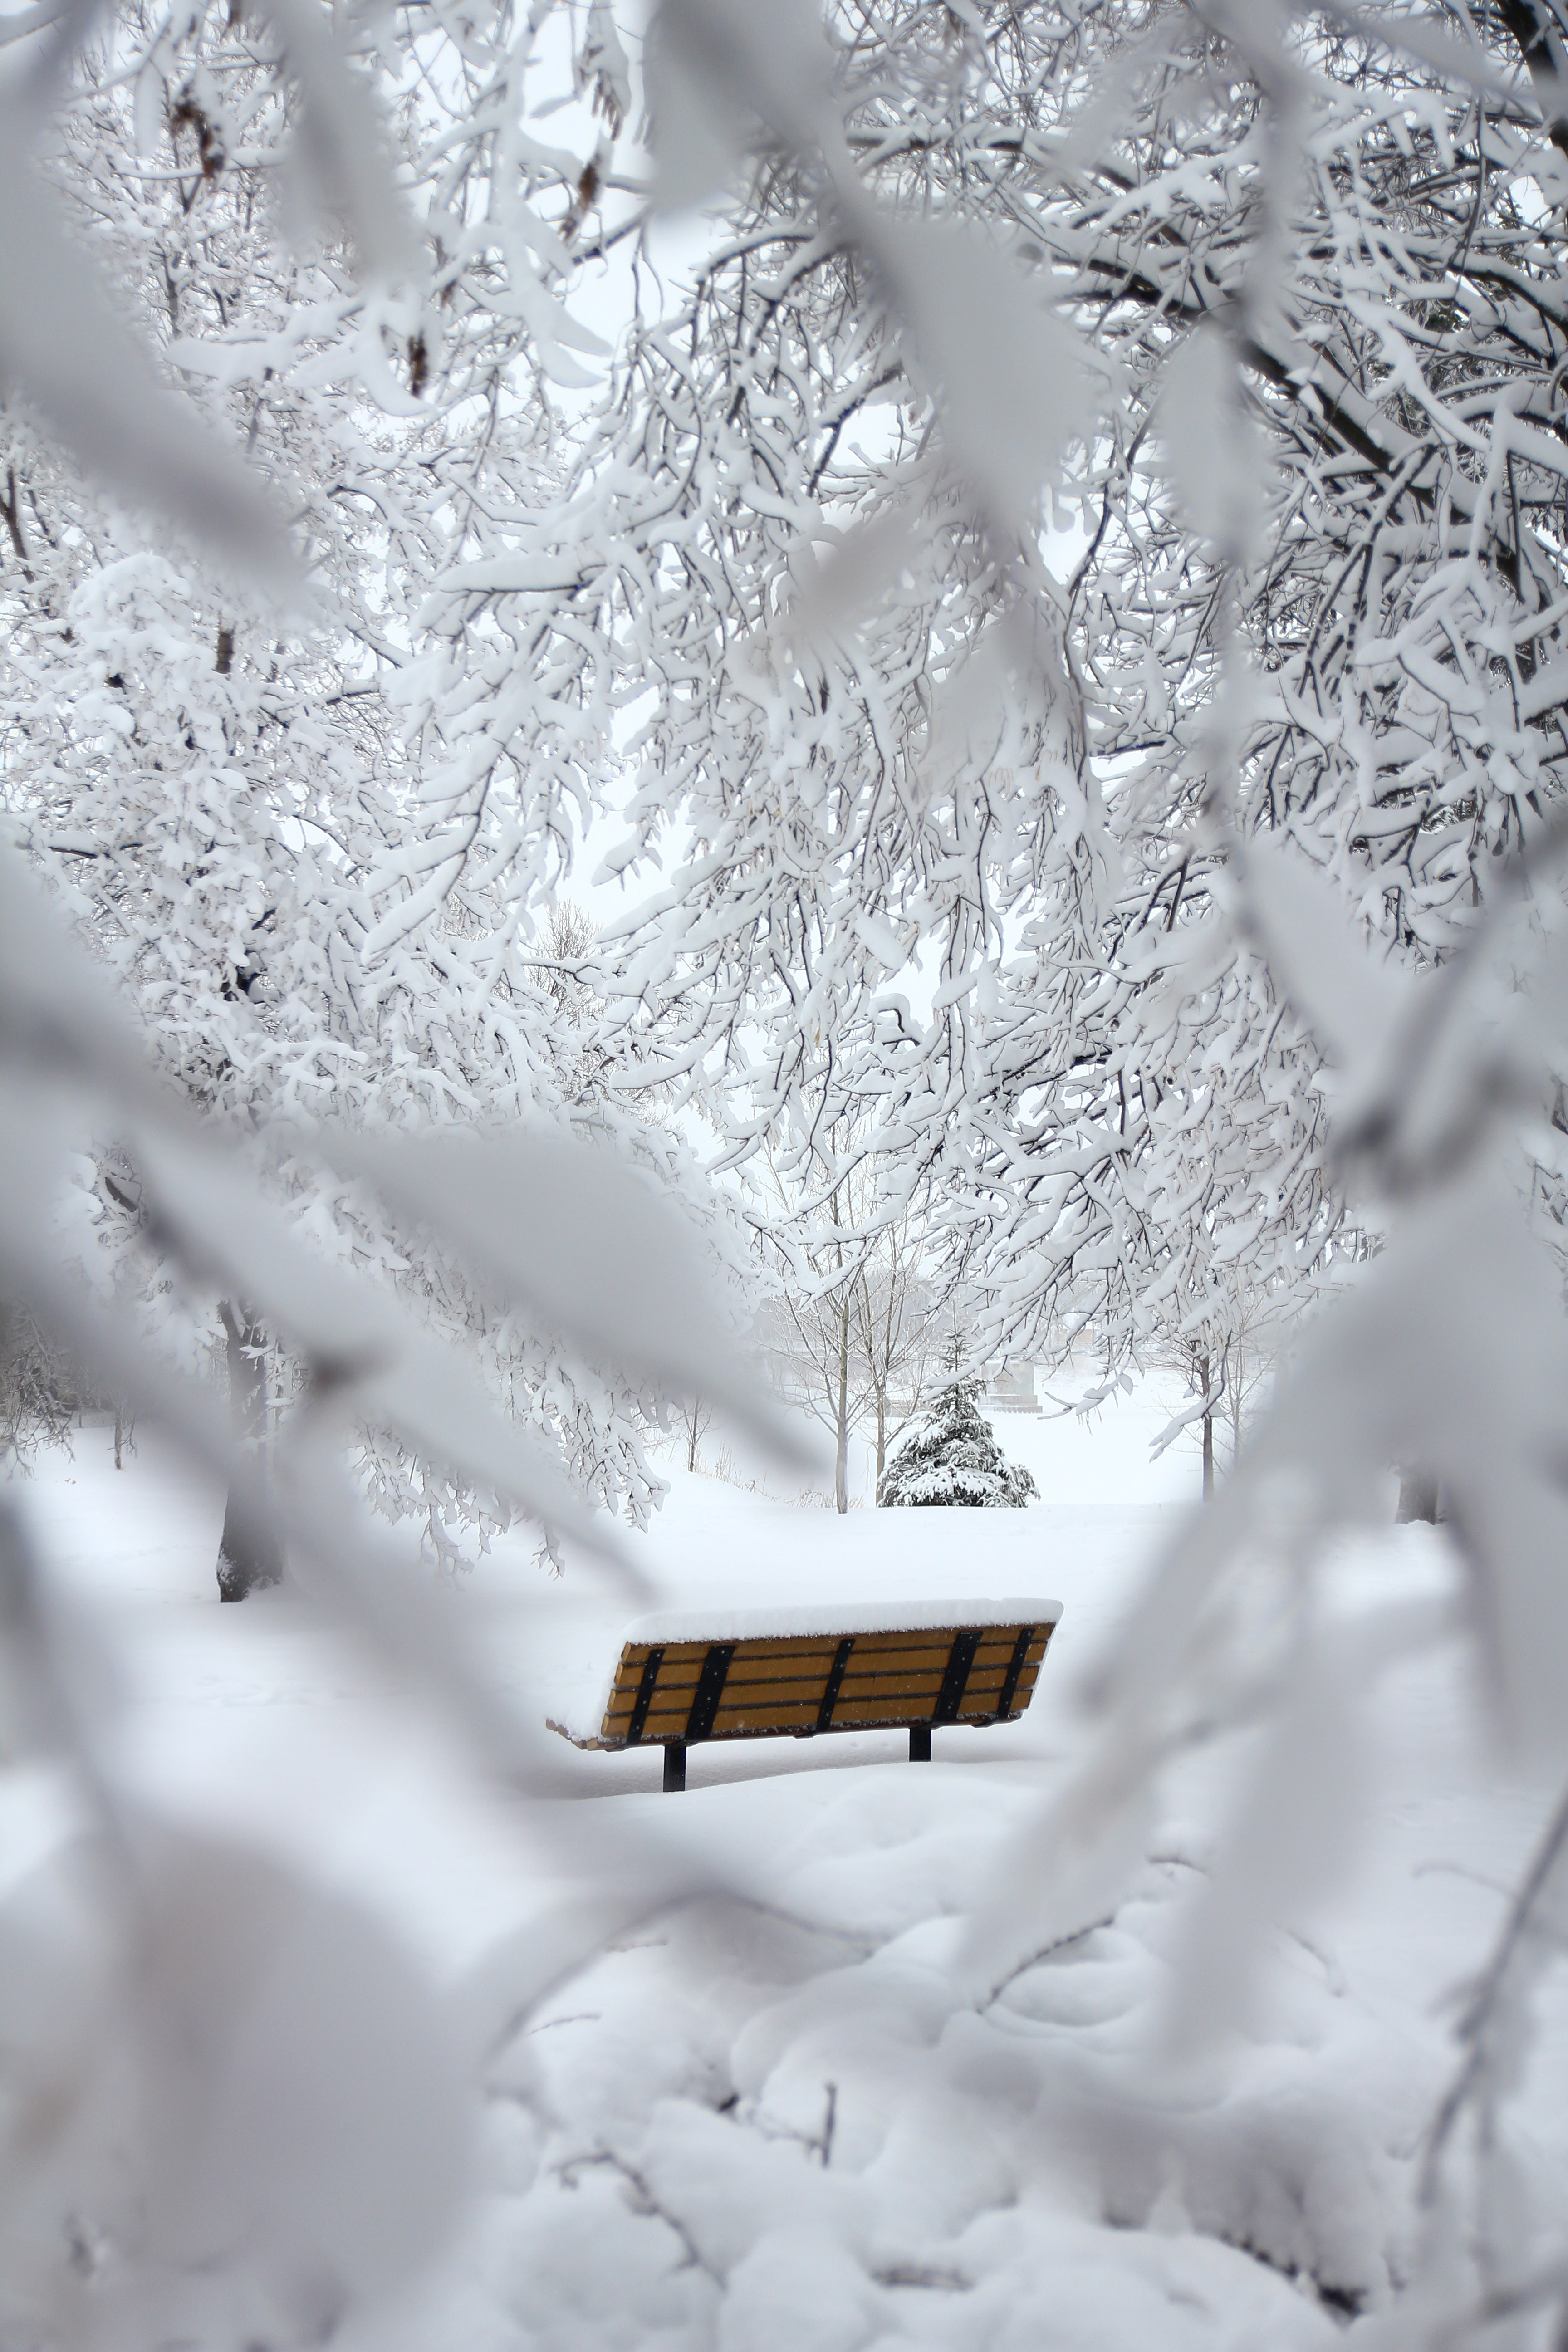 brown-outdoor-bench-with-snow-on-top-954713.jpg